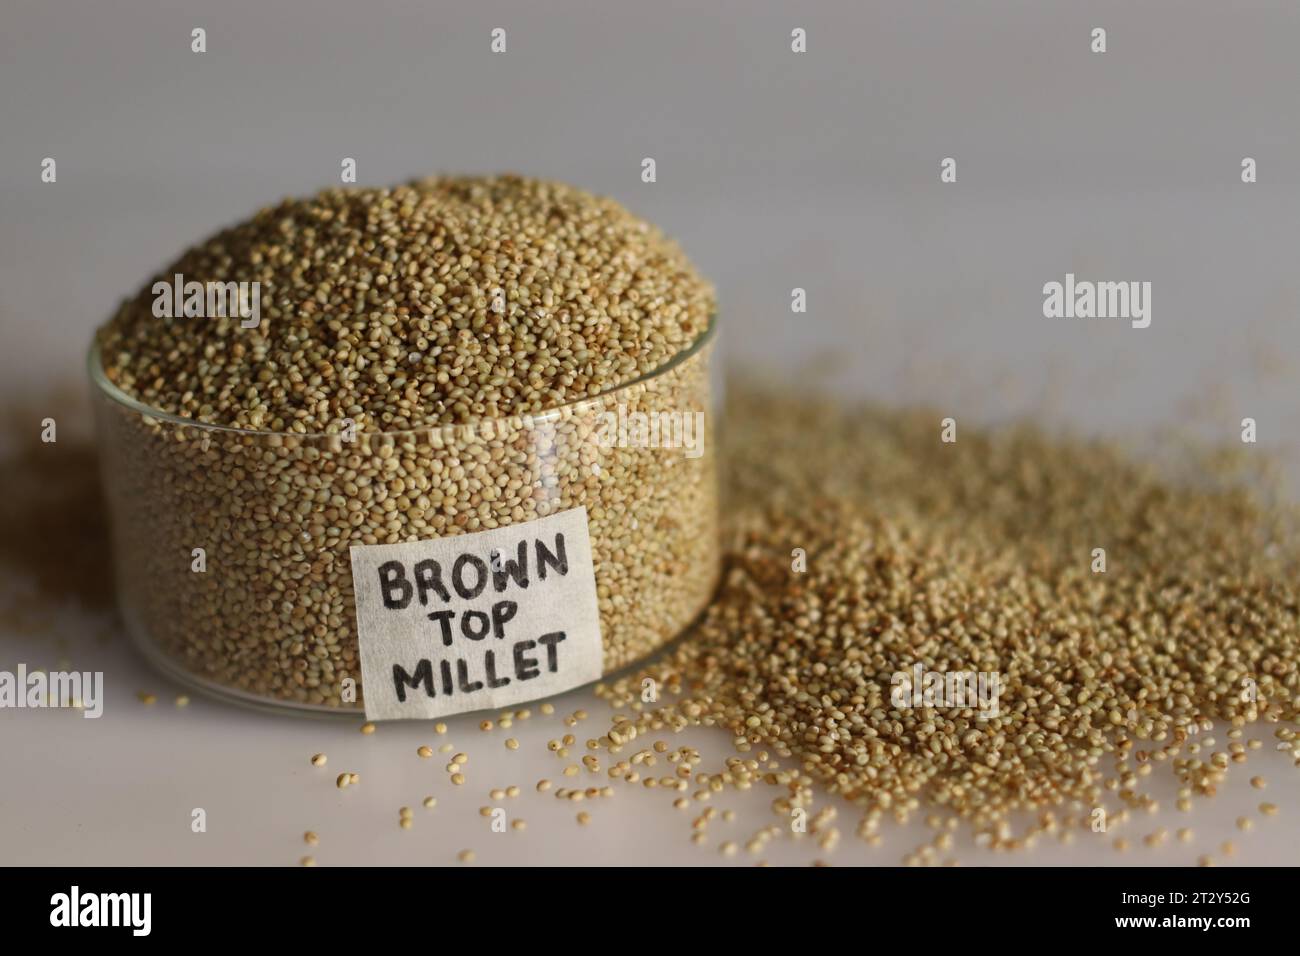 Closeup of browntop millet grains in a pristine glass bowl with label on it filled to the brim, showcasing its wholesome grains, ideal for illustratin Stock Photo